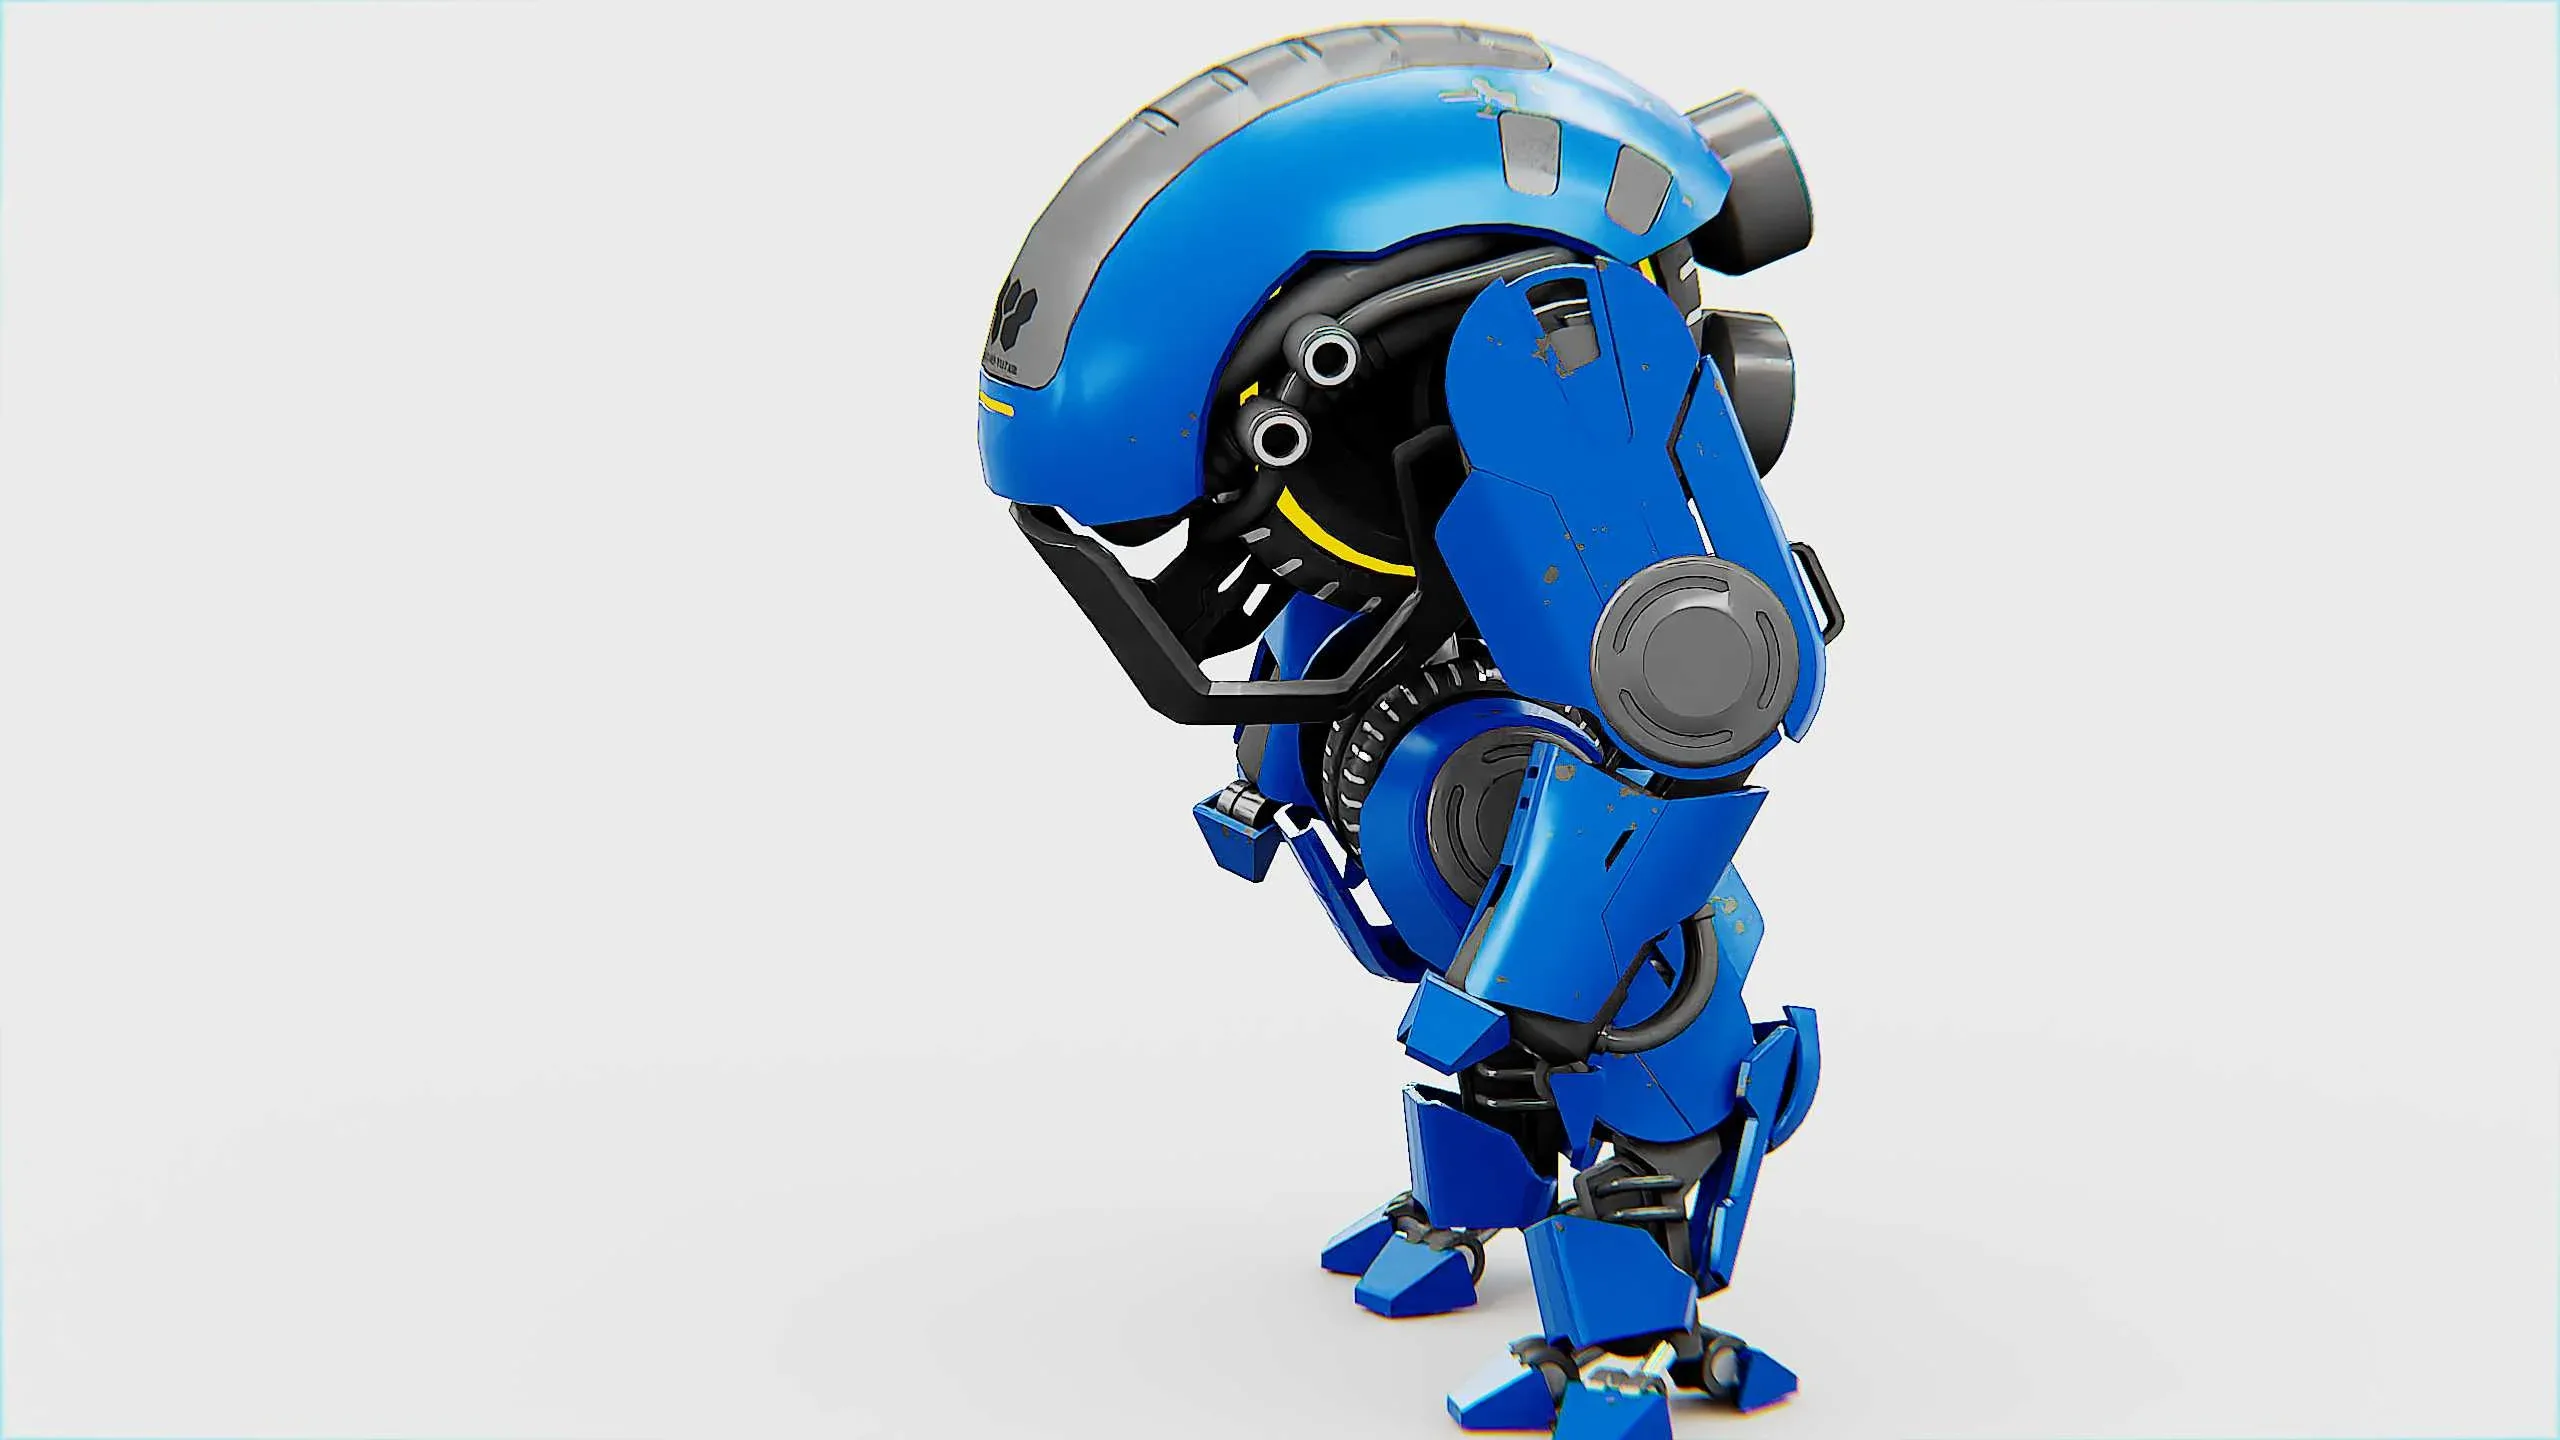 NEMO FIGHTER BOT  Auto-Rig Pro Rigged For Mixamo, Unreal Engine Unity